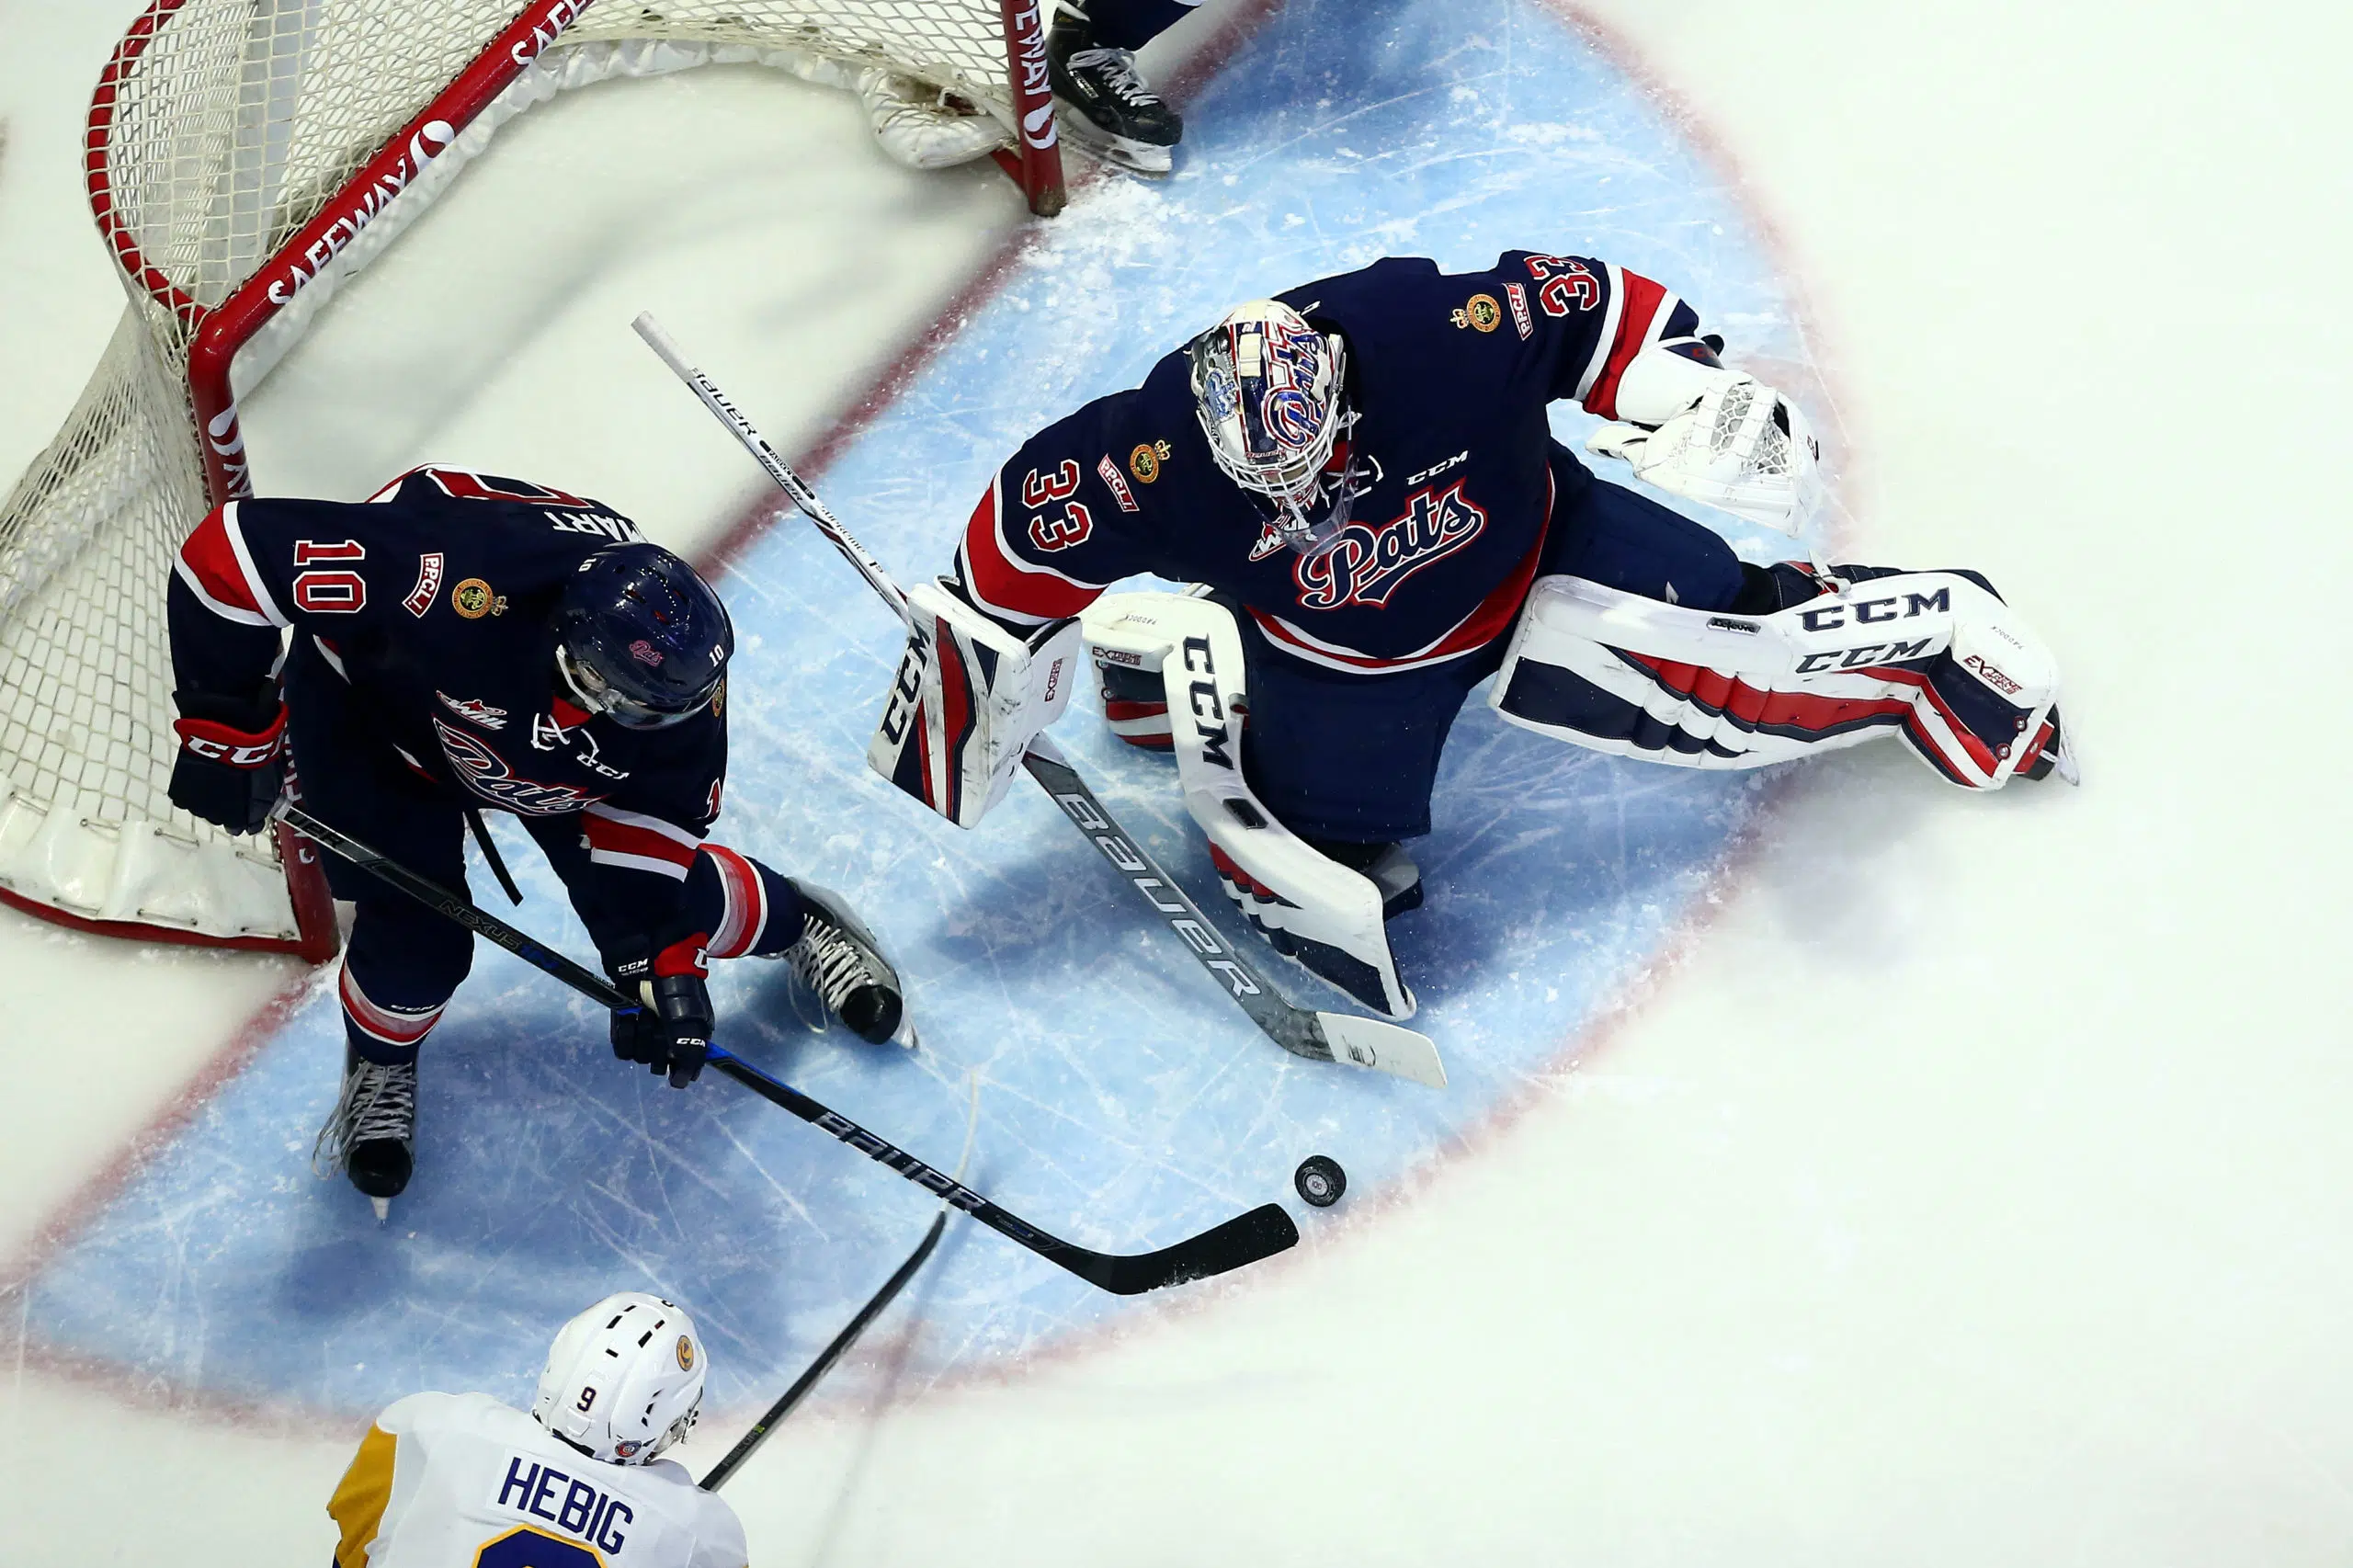 Blades get revenge on the Pats with 6-4 win